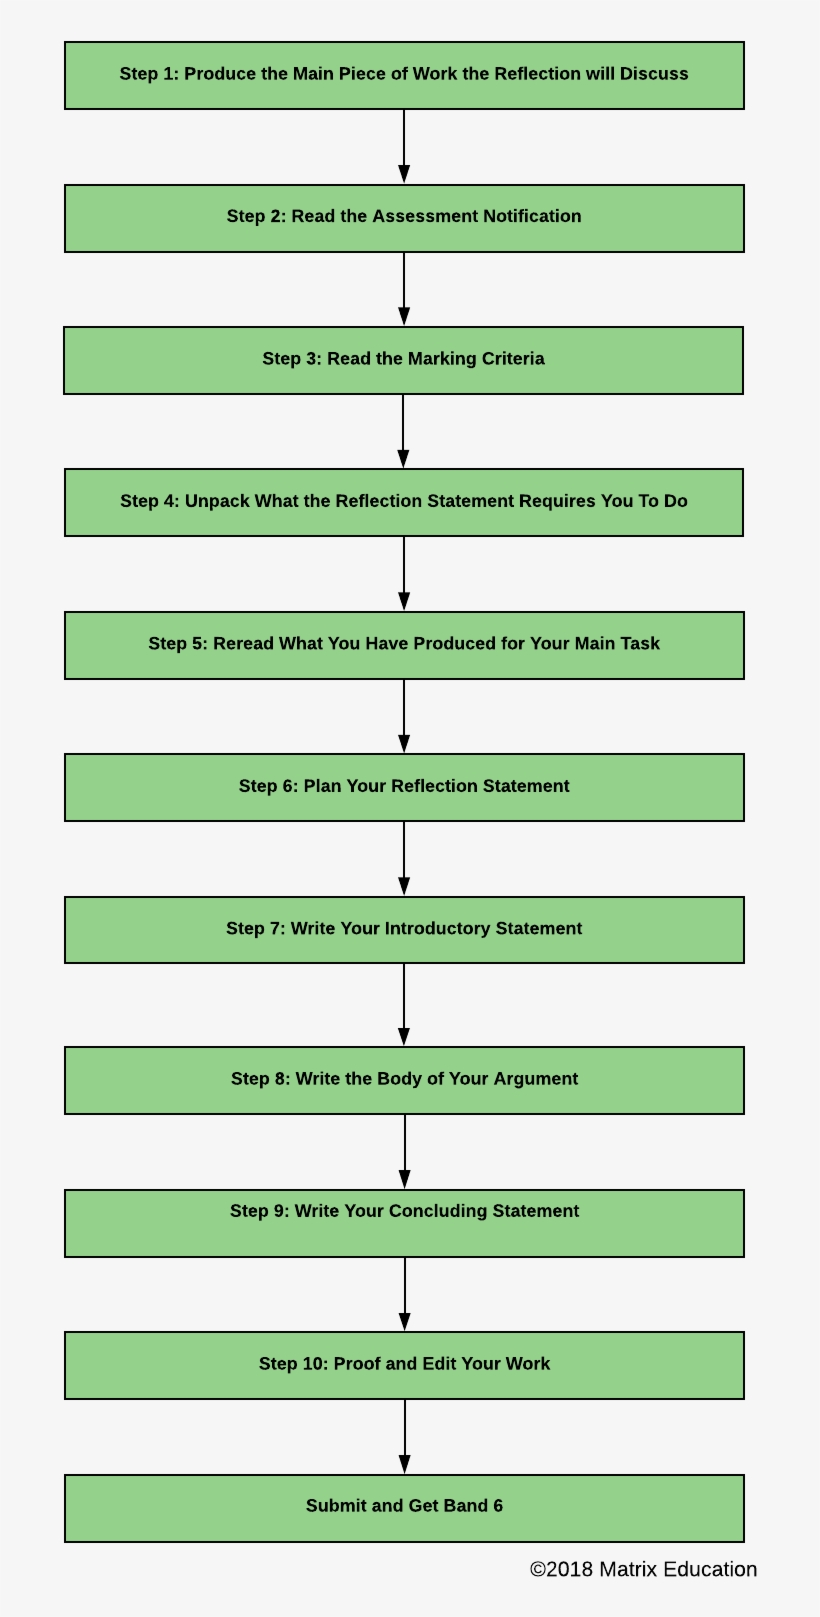 How To Write A Reflection Statement Step By Step, transparent png #8614575